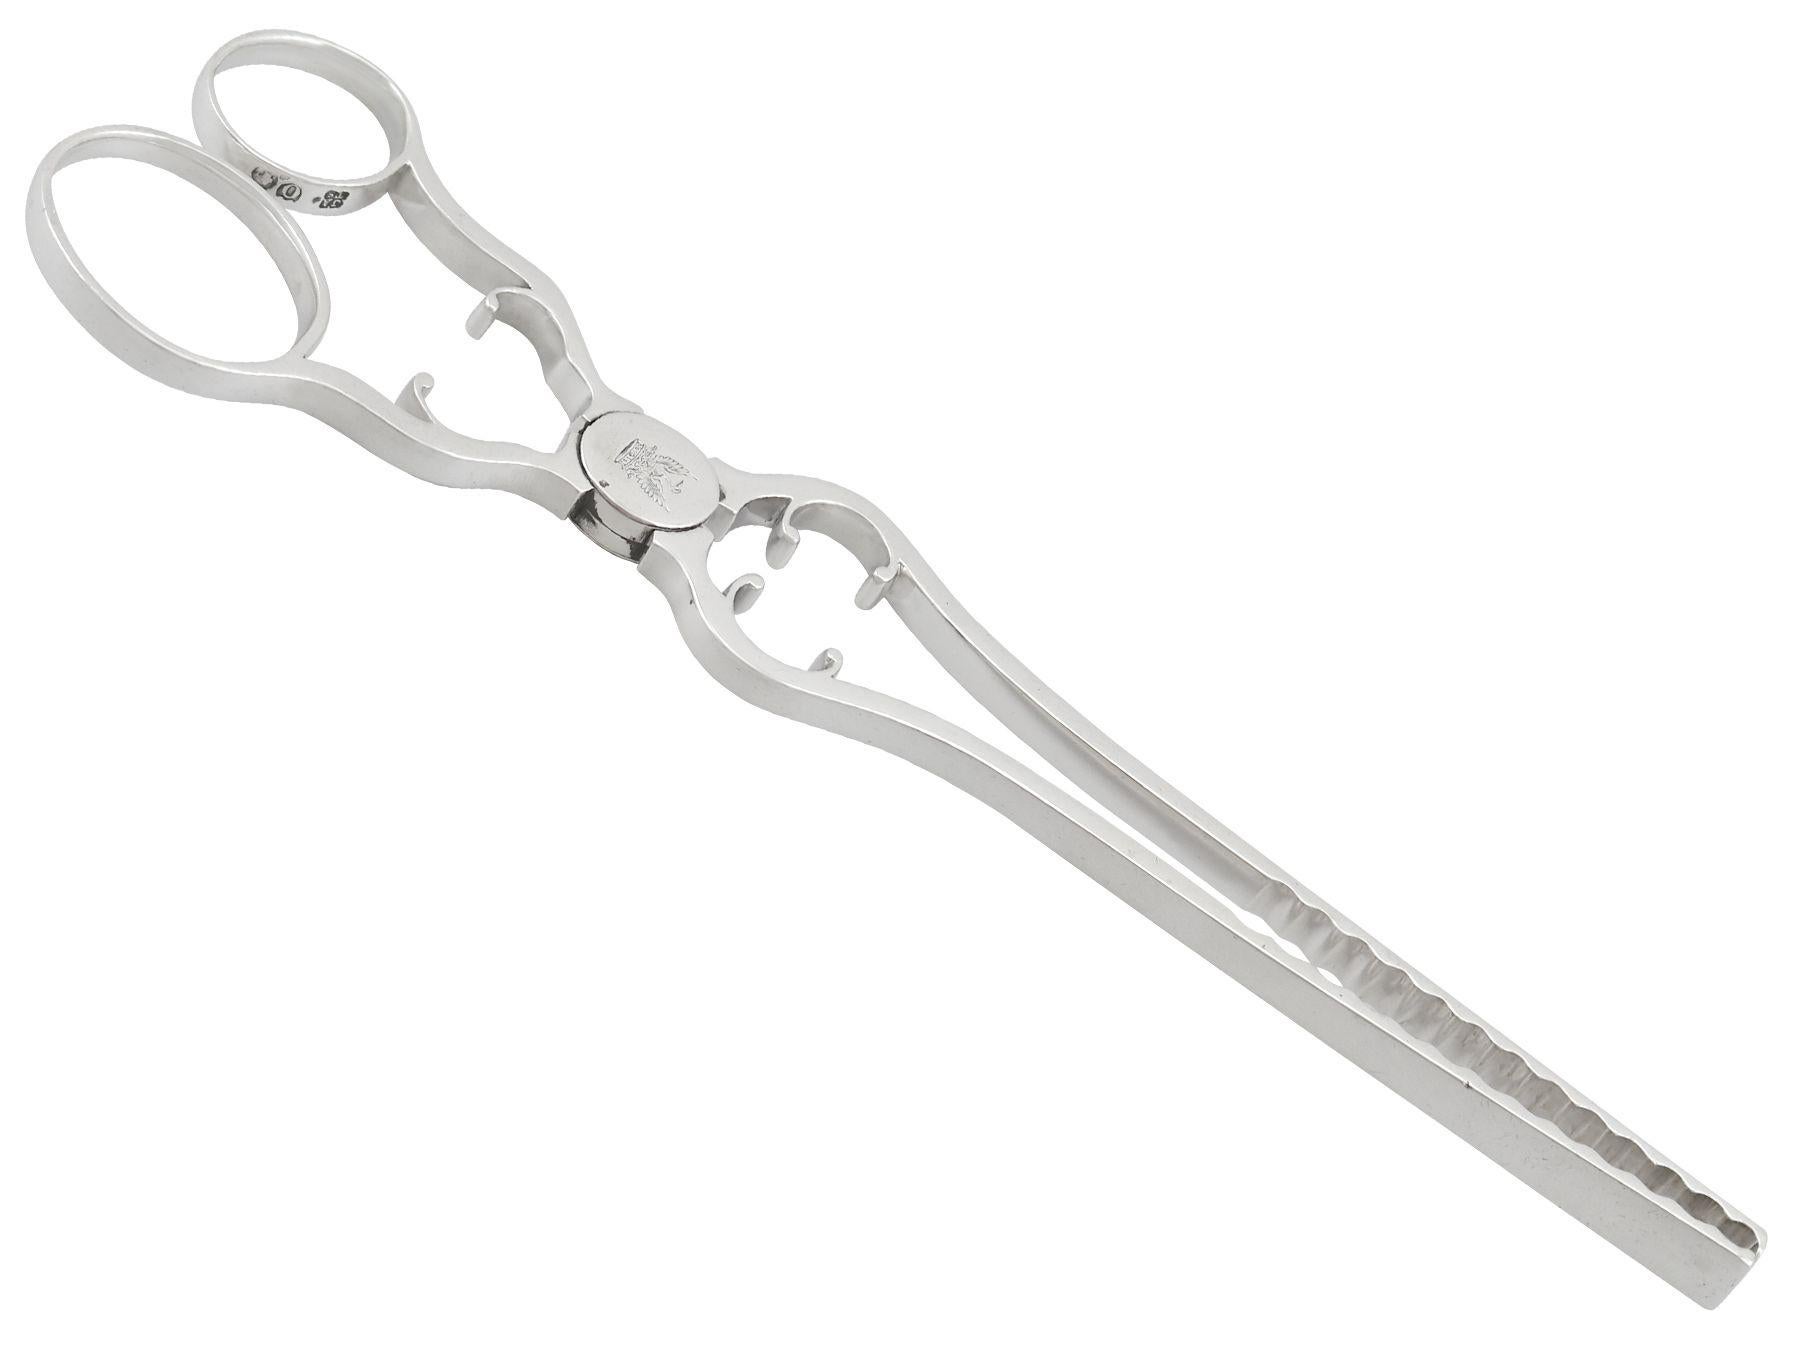 An exceptional, fine and impressive pair of antique Victorian English sterling silver asparagus tongs; an addition to our silver flatware collection

These exceptional, fine and impressive antique Victorian sterling silver asparagus tongs have a